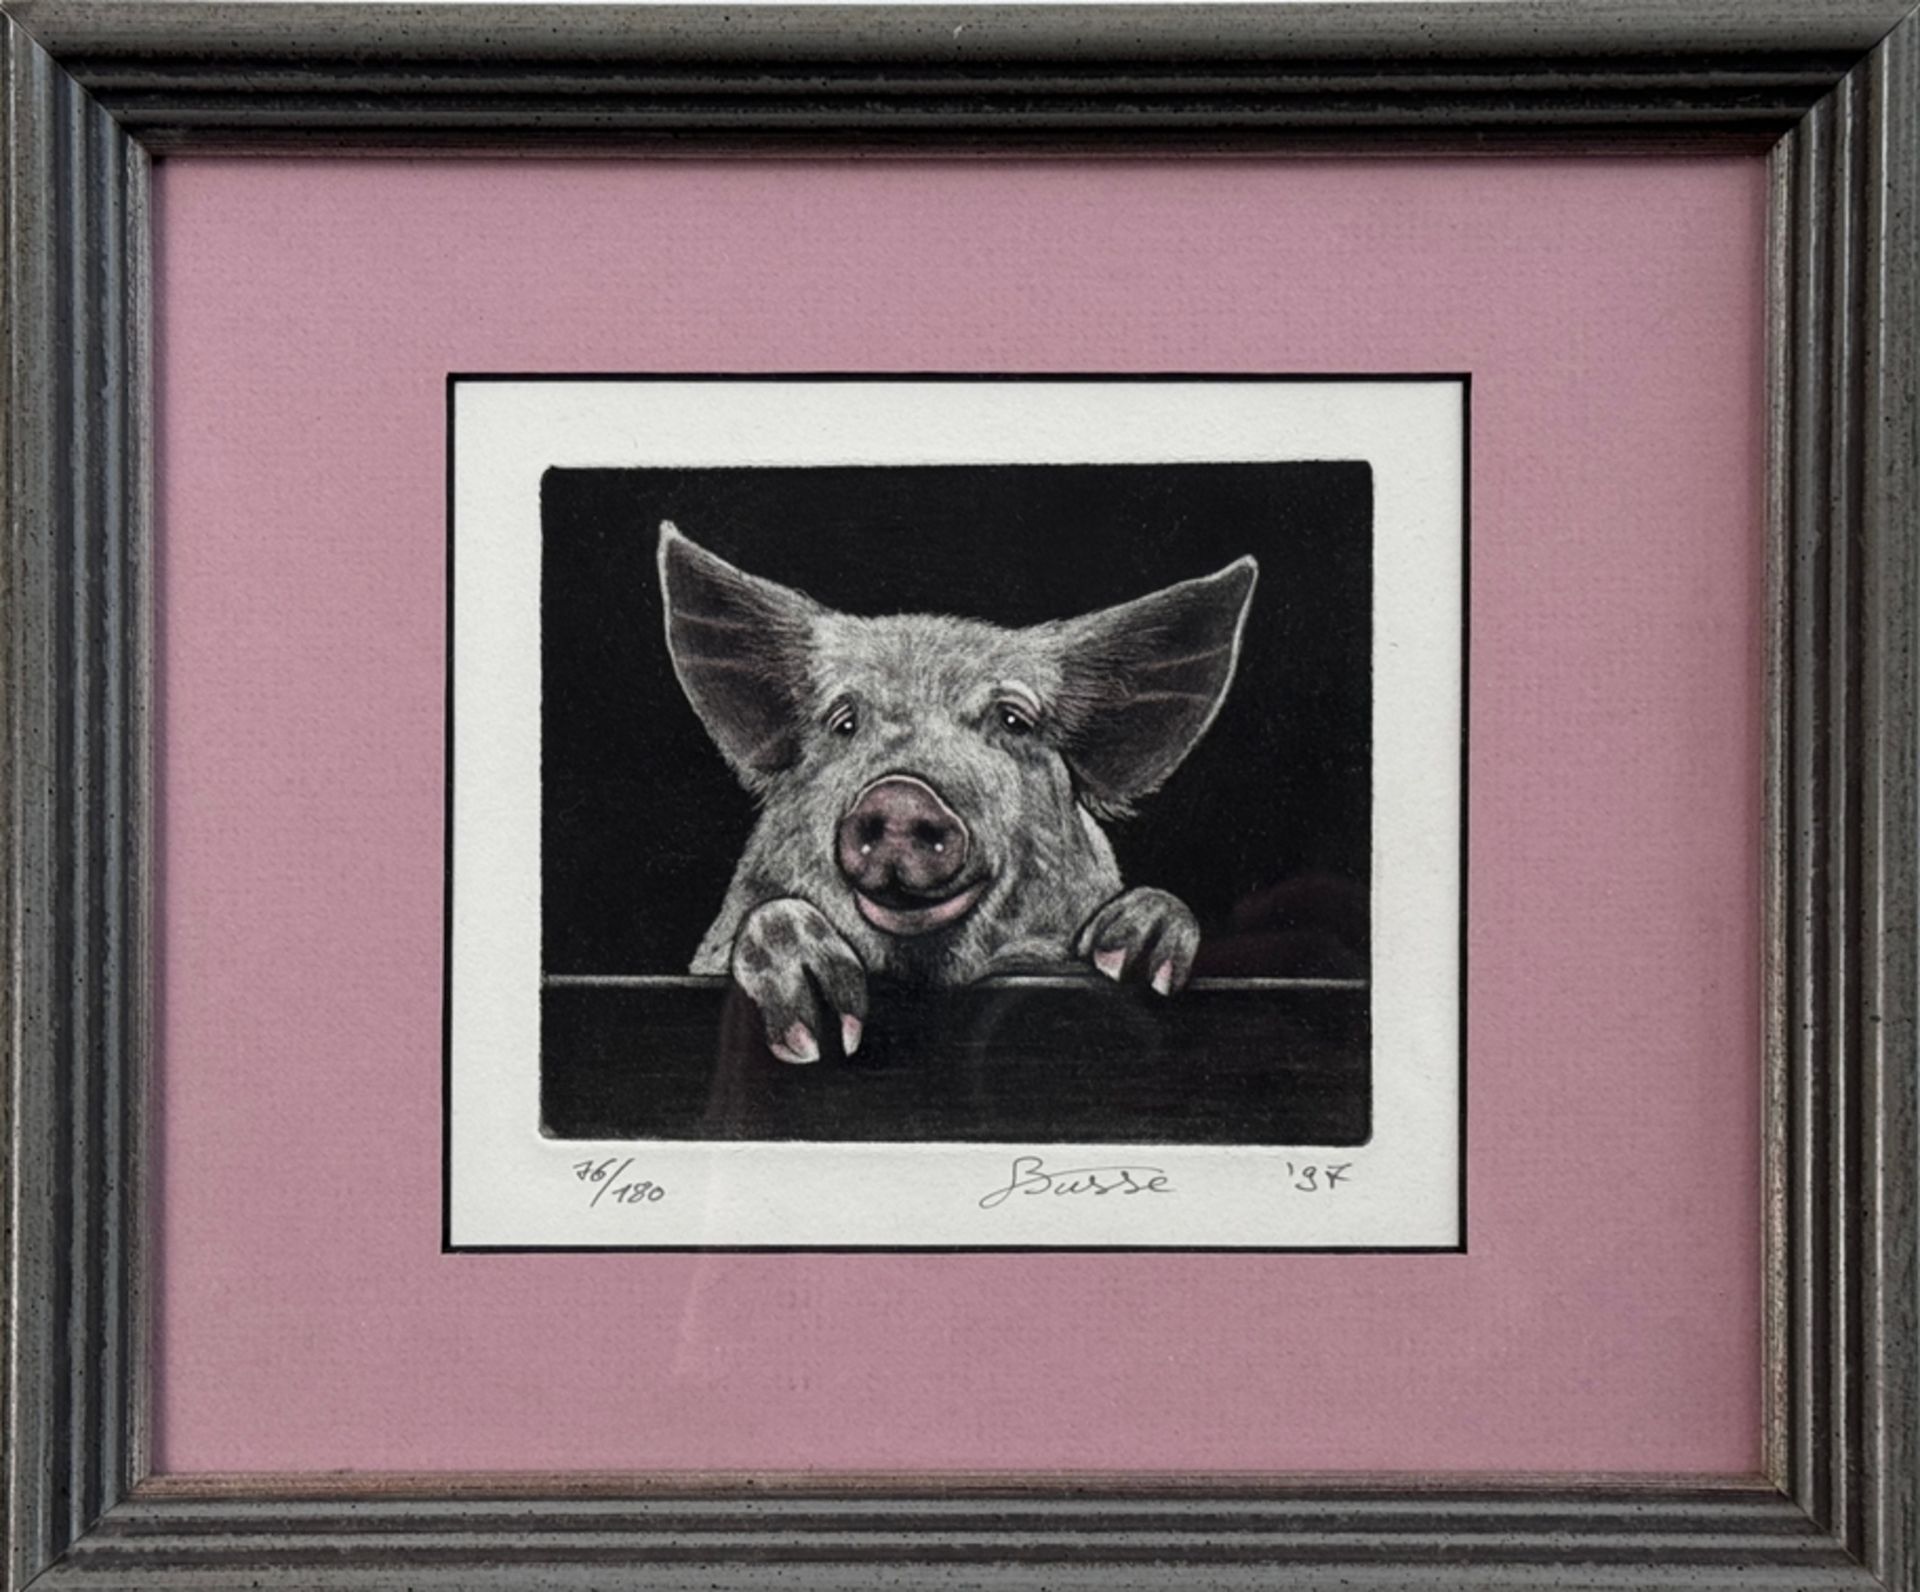 Busse (20th century) "Pig", etching, copy 76/180, signed by hand at bottom, dated (19)97 at bottom - Image 2 of 3